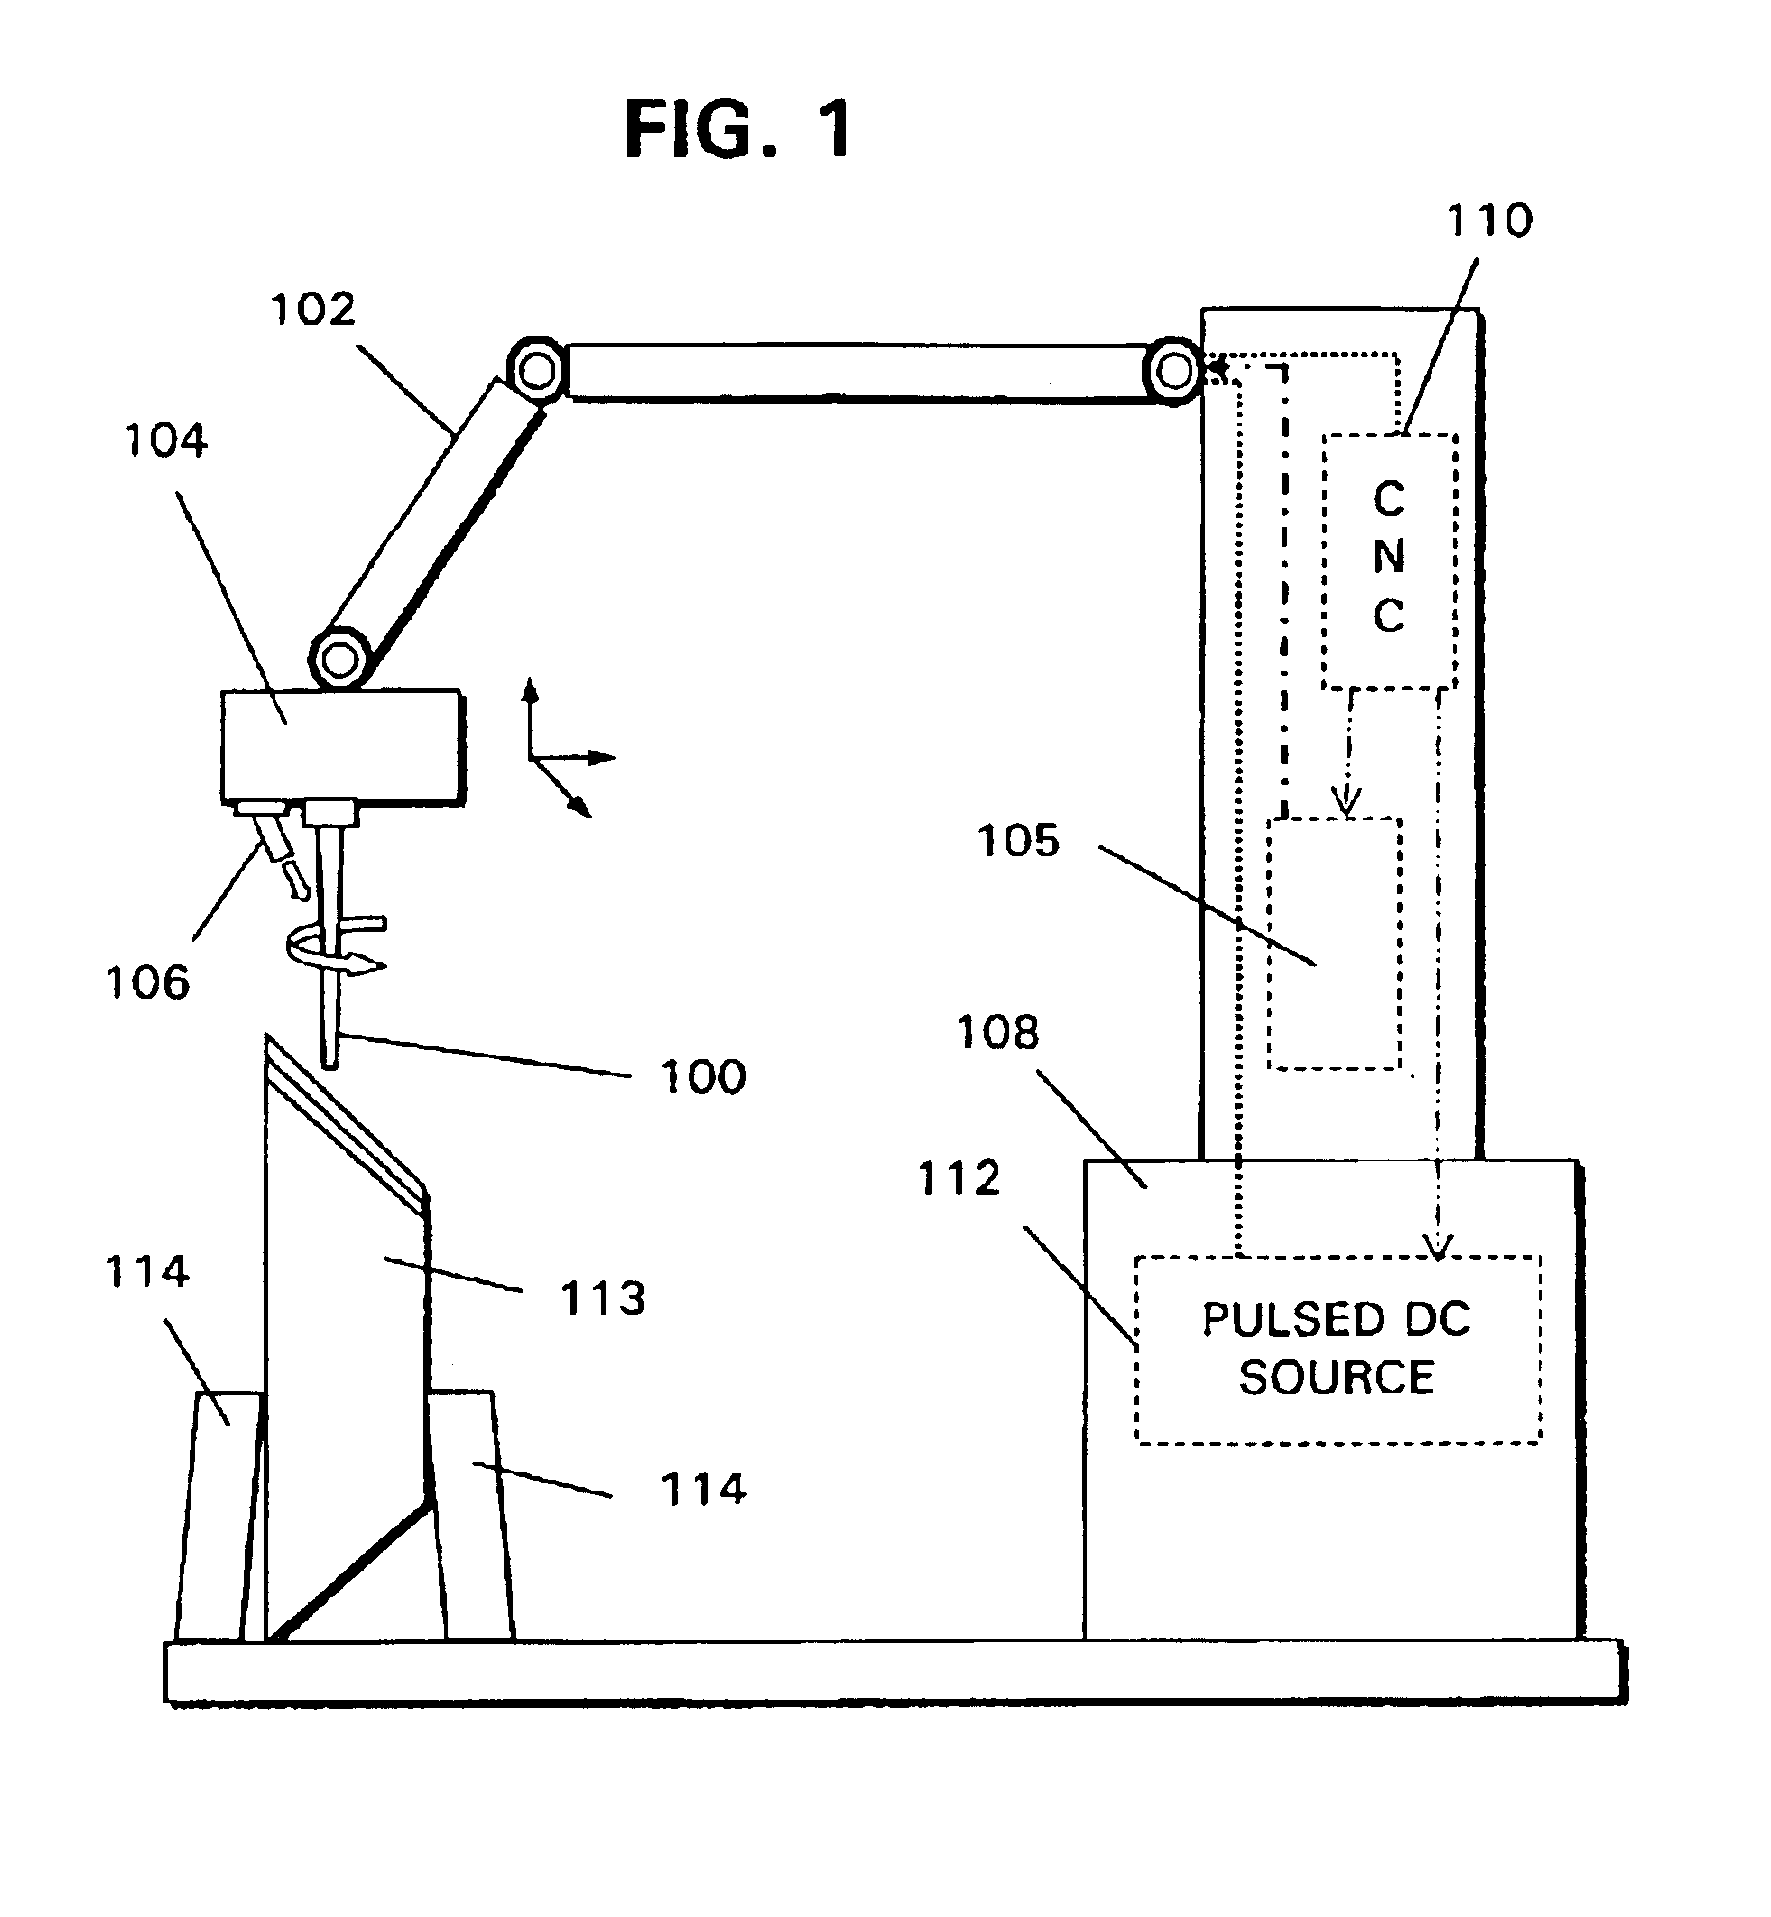 Multi-axis numerical control electromachining of bladed disks